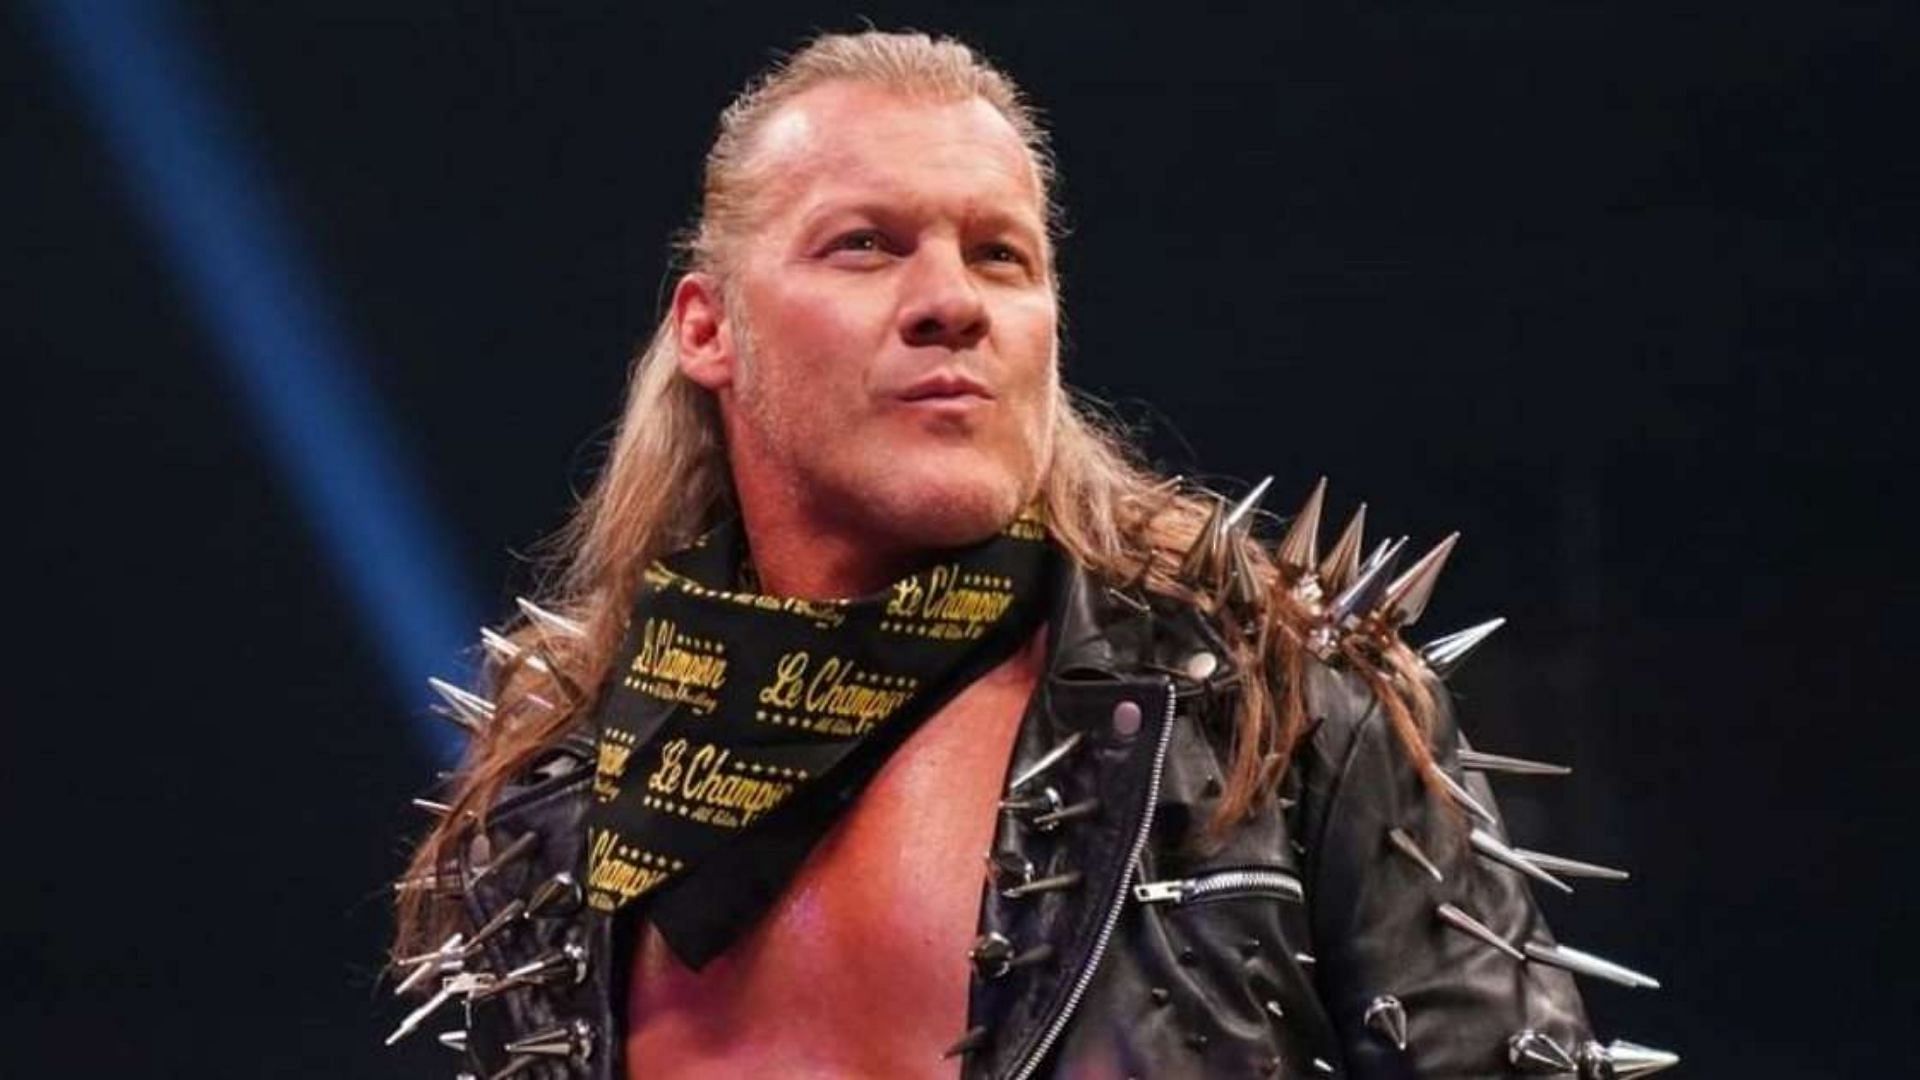 Chris Jericho was the first-ever AEW World Champion.